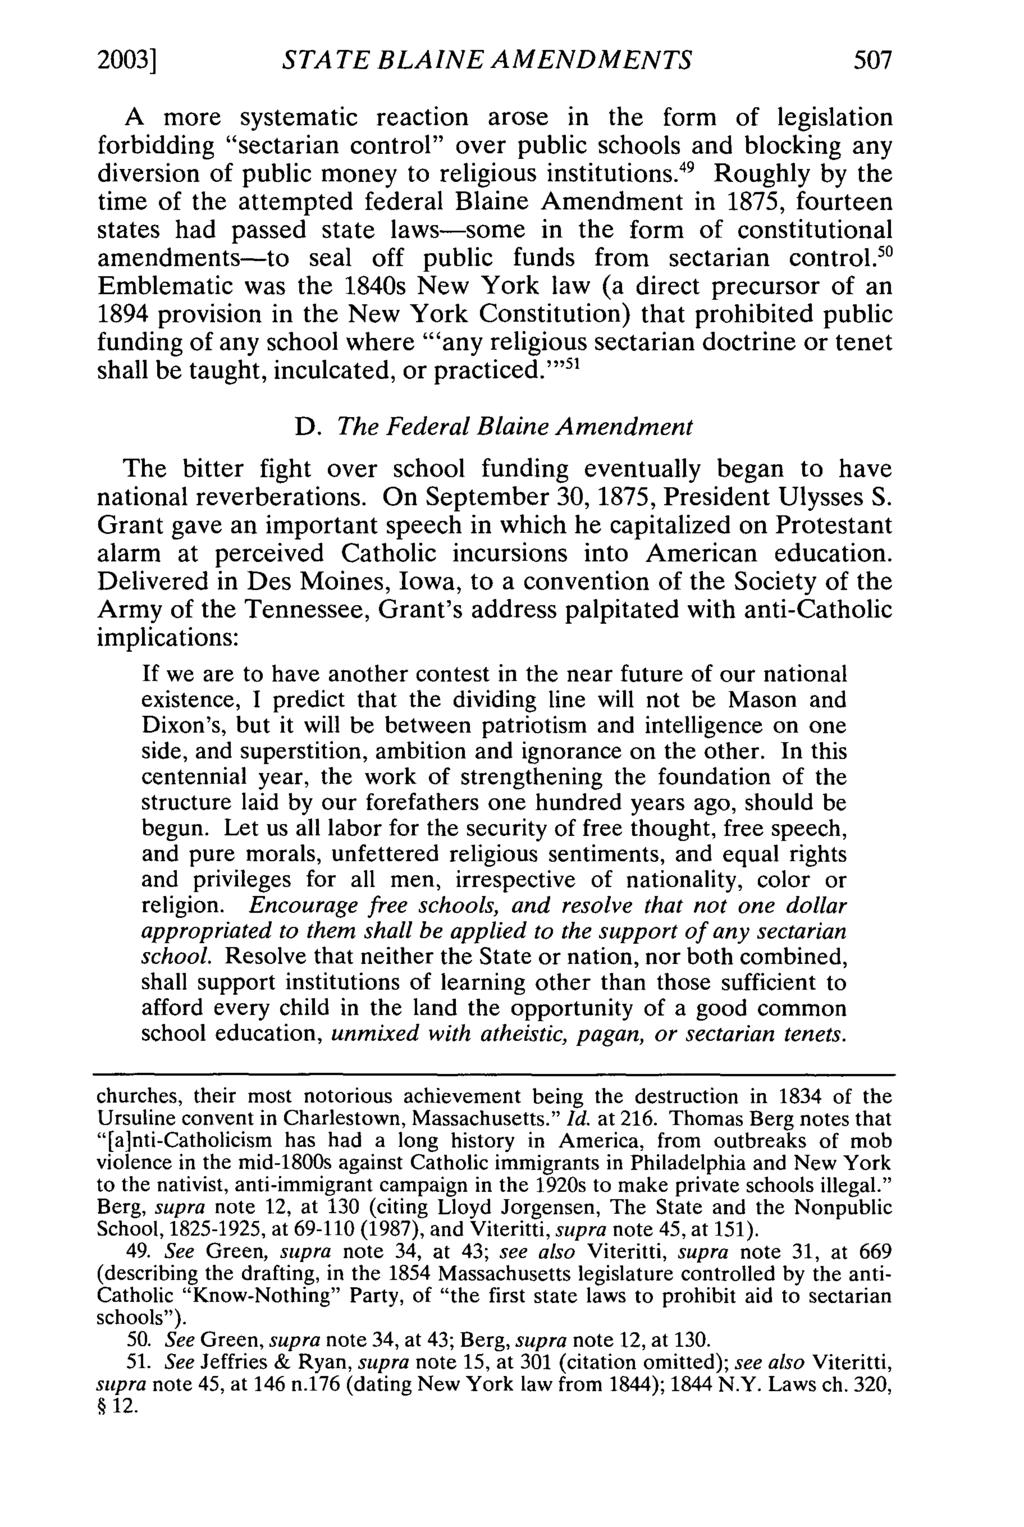 2003] STATE BLAINE AMENDMENTS A more systematic reaction arose in the form of legislation forbidding "sectarian control" over public schools and blocking any diversion of public money to religious